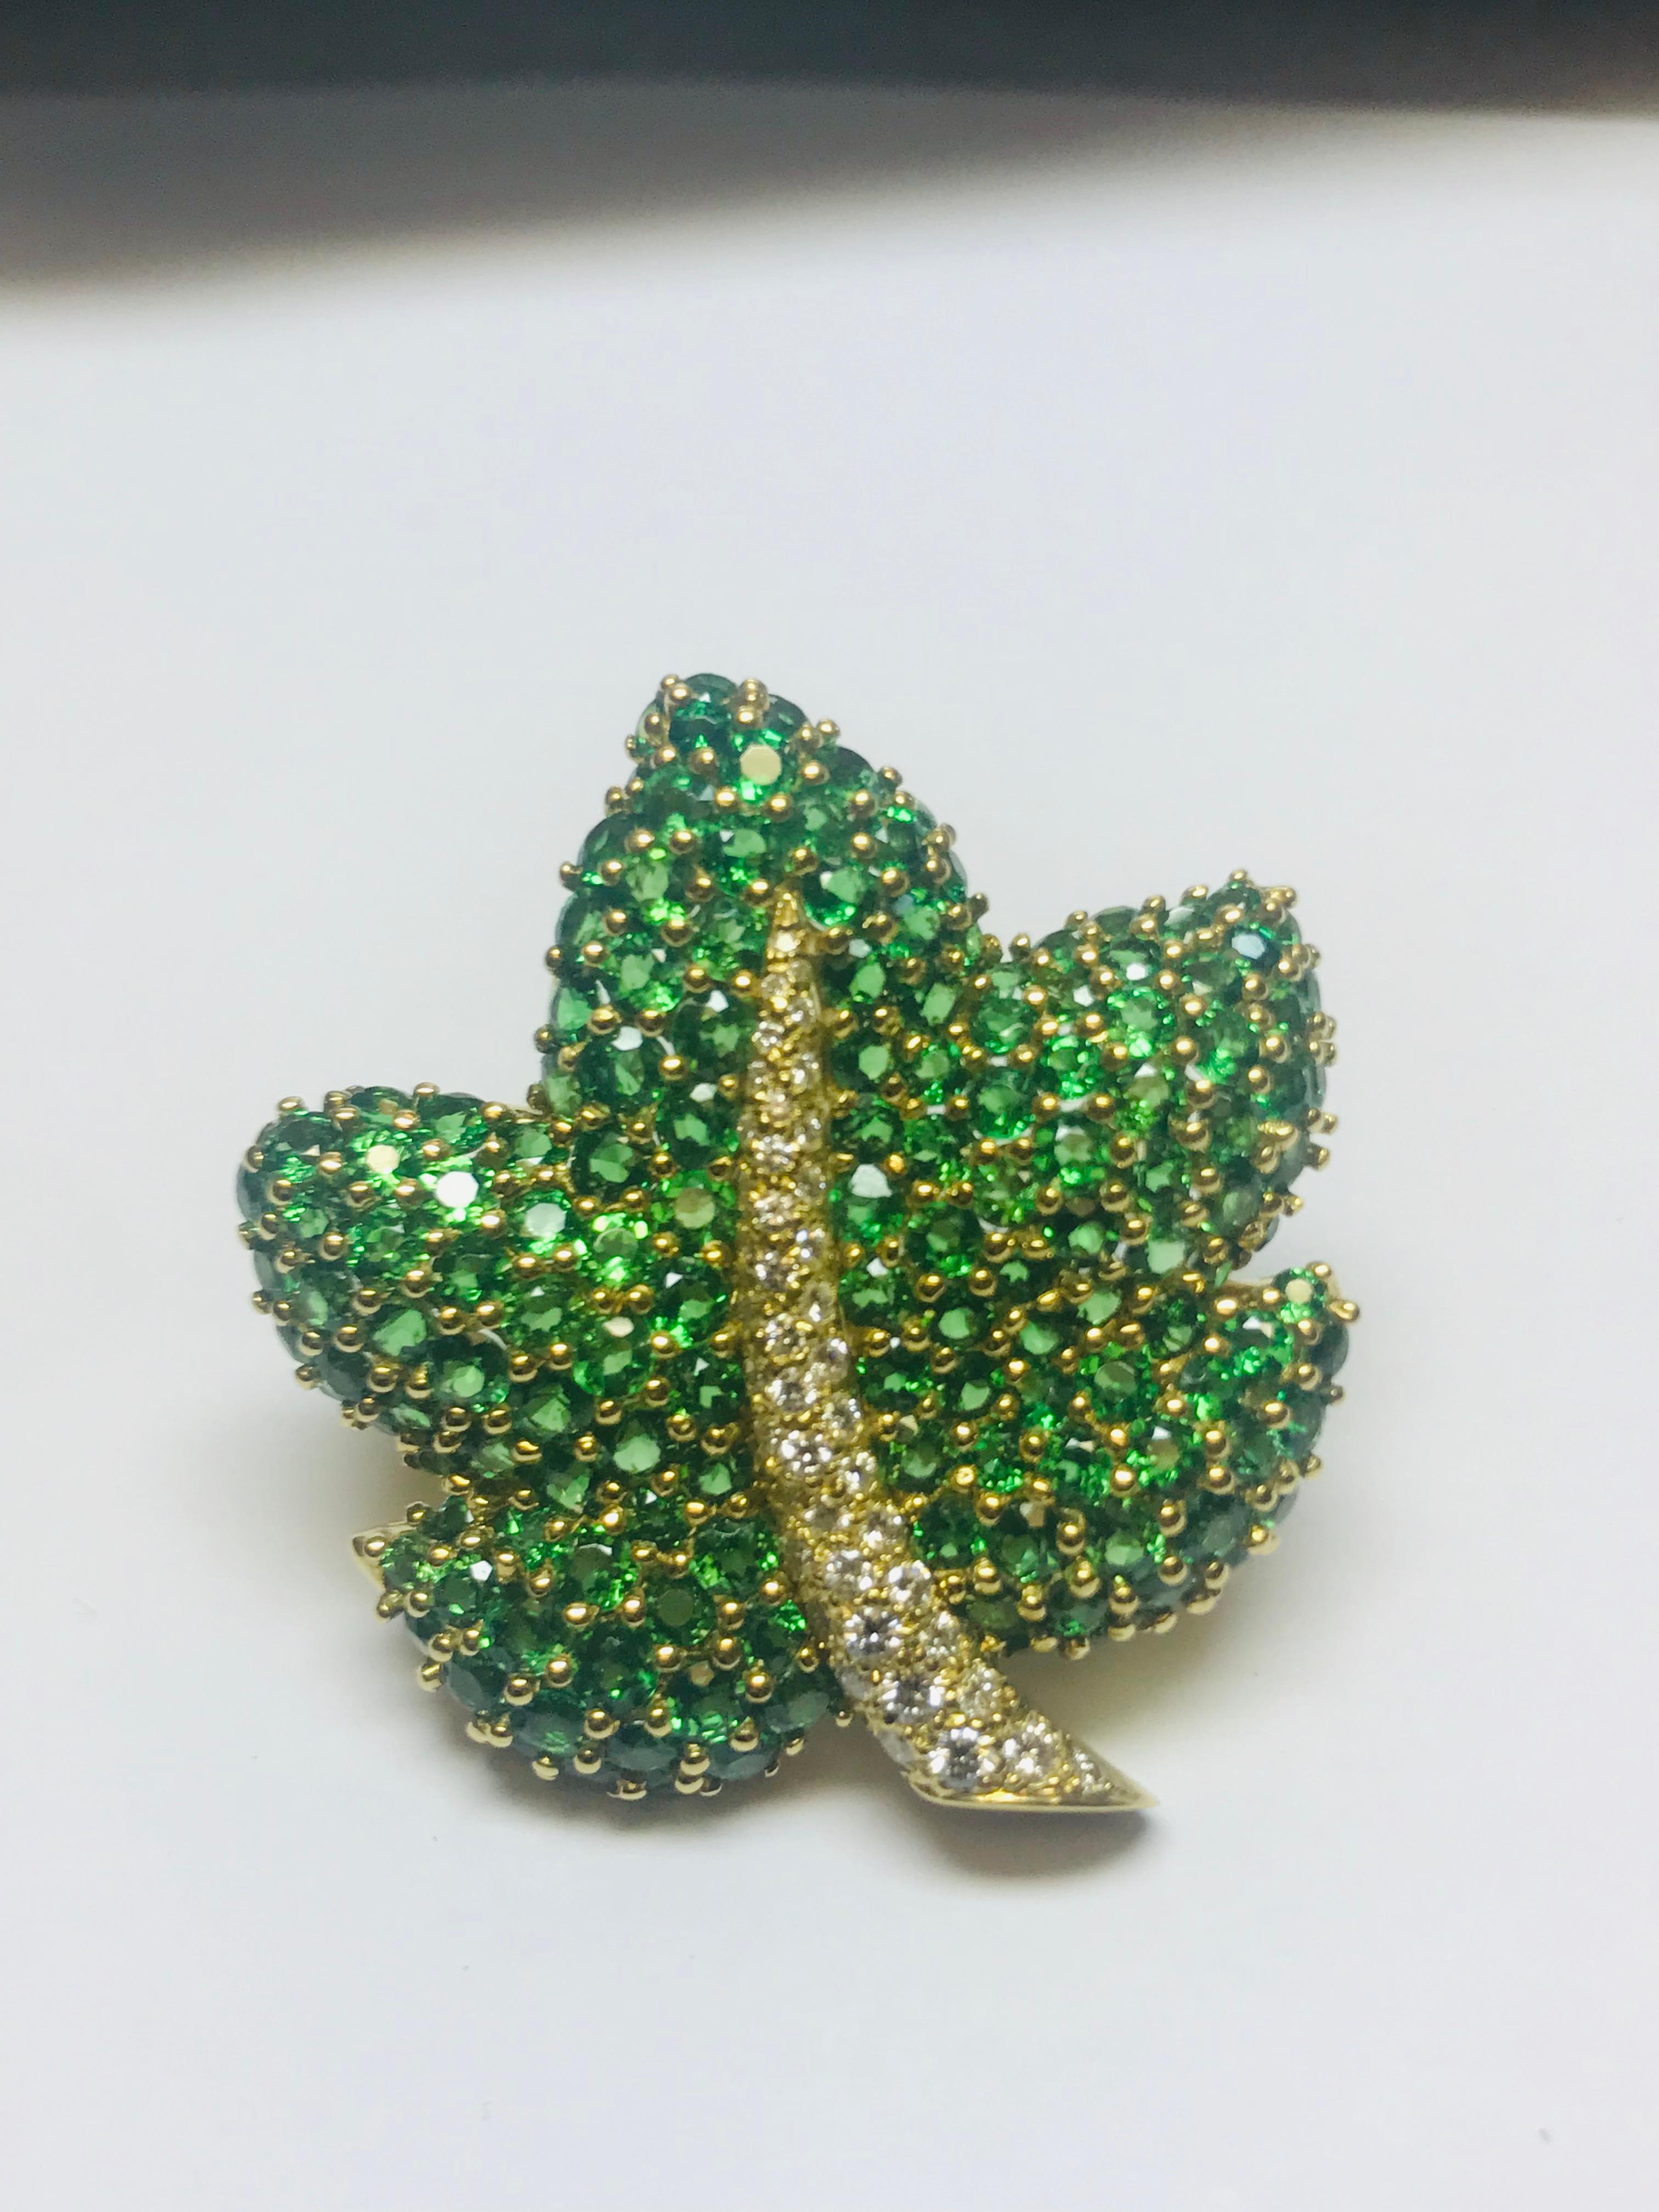 This incredibly vibrant Maple leaf brooch, designed and manufactured by Jean Vitau, has 13 carats of incredibly matched rare Tsavorite Garnets and .74 carats of white diamonds. There's a double pin to insure stability when worn and can also be